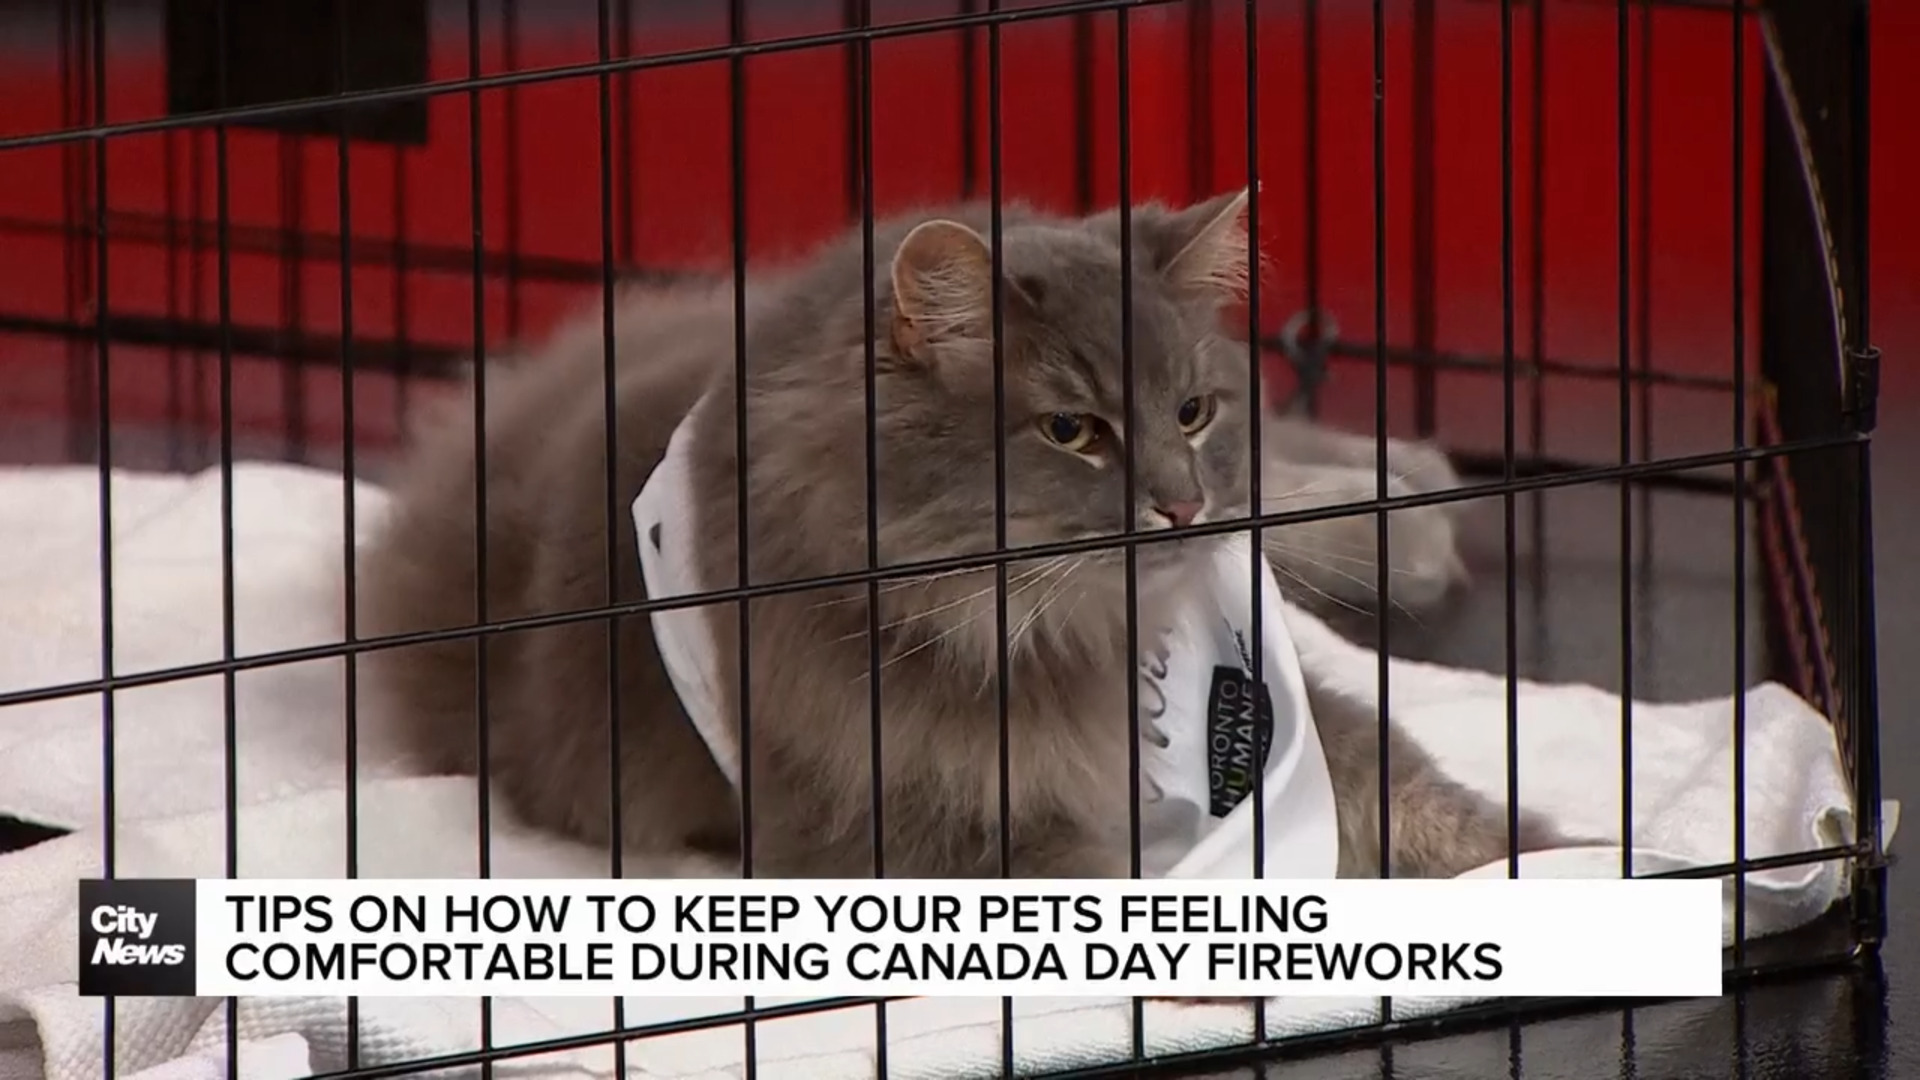 Tips for keeping pets comfortable during Canada day fireworks